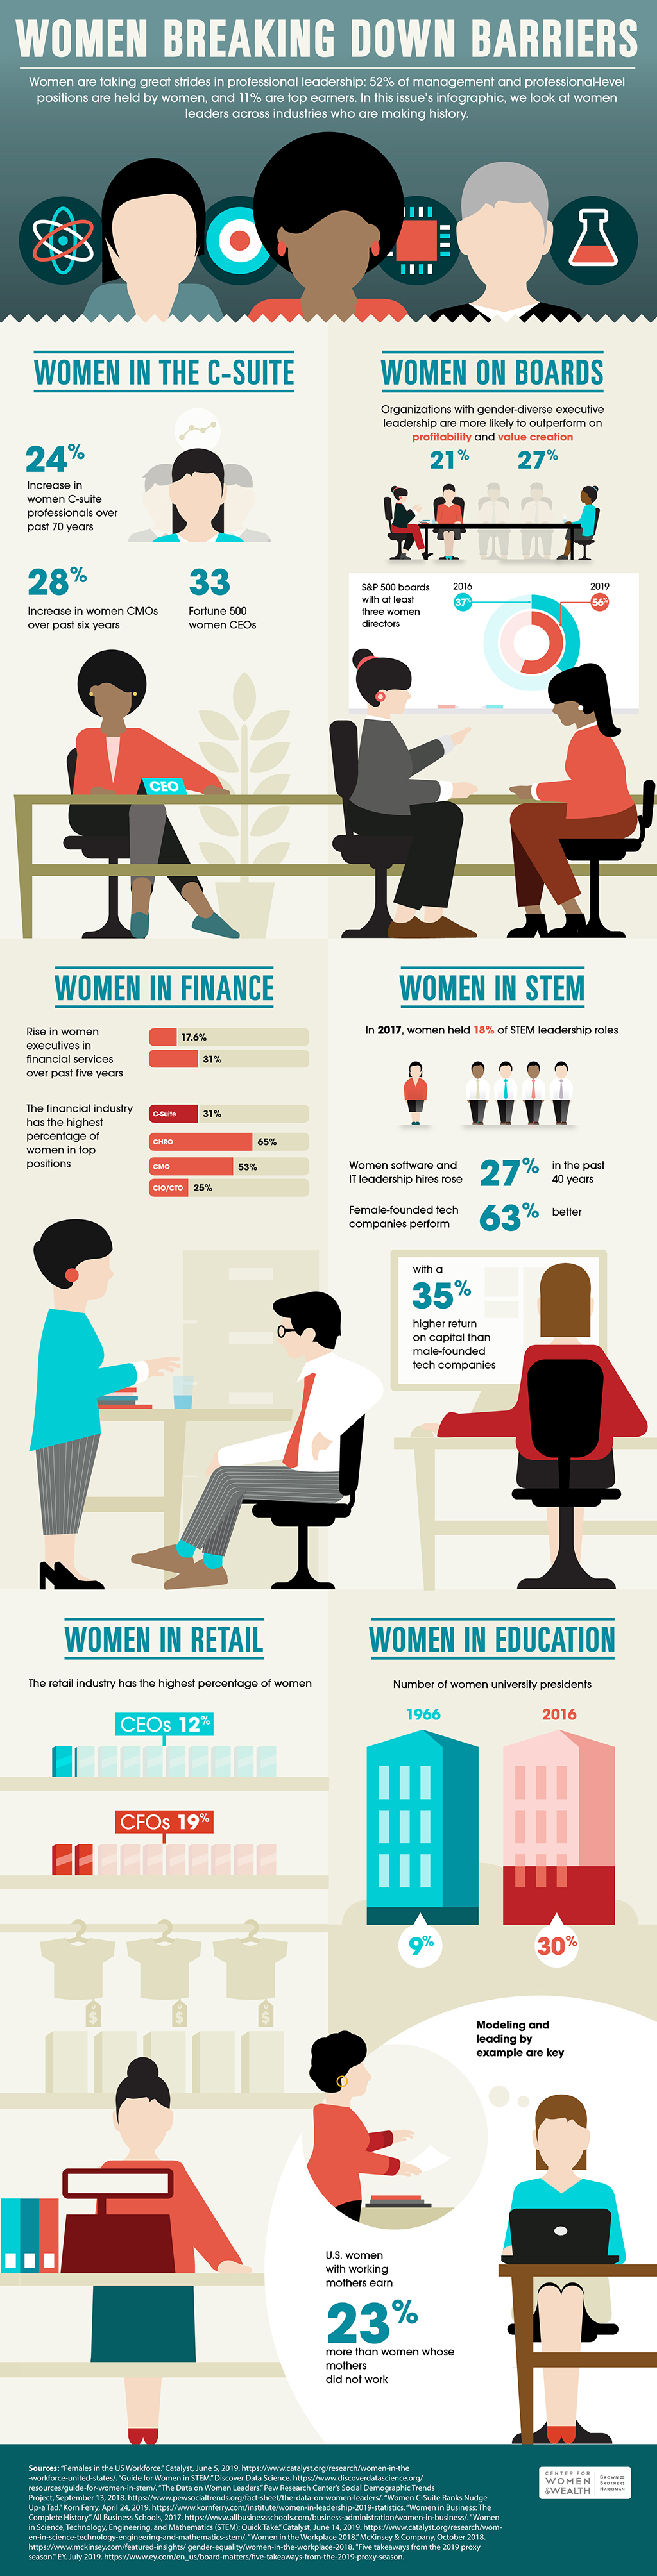 The progress that women have man in increasing their representation in leadership roles and as to-earning in several industries, such as finance, stem, and education